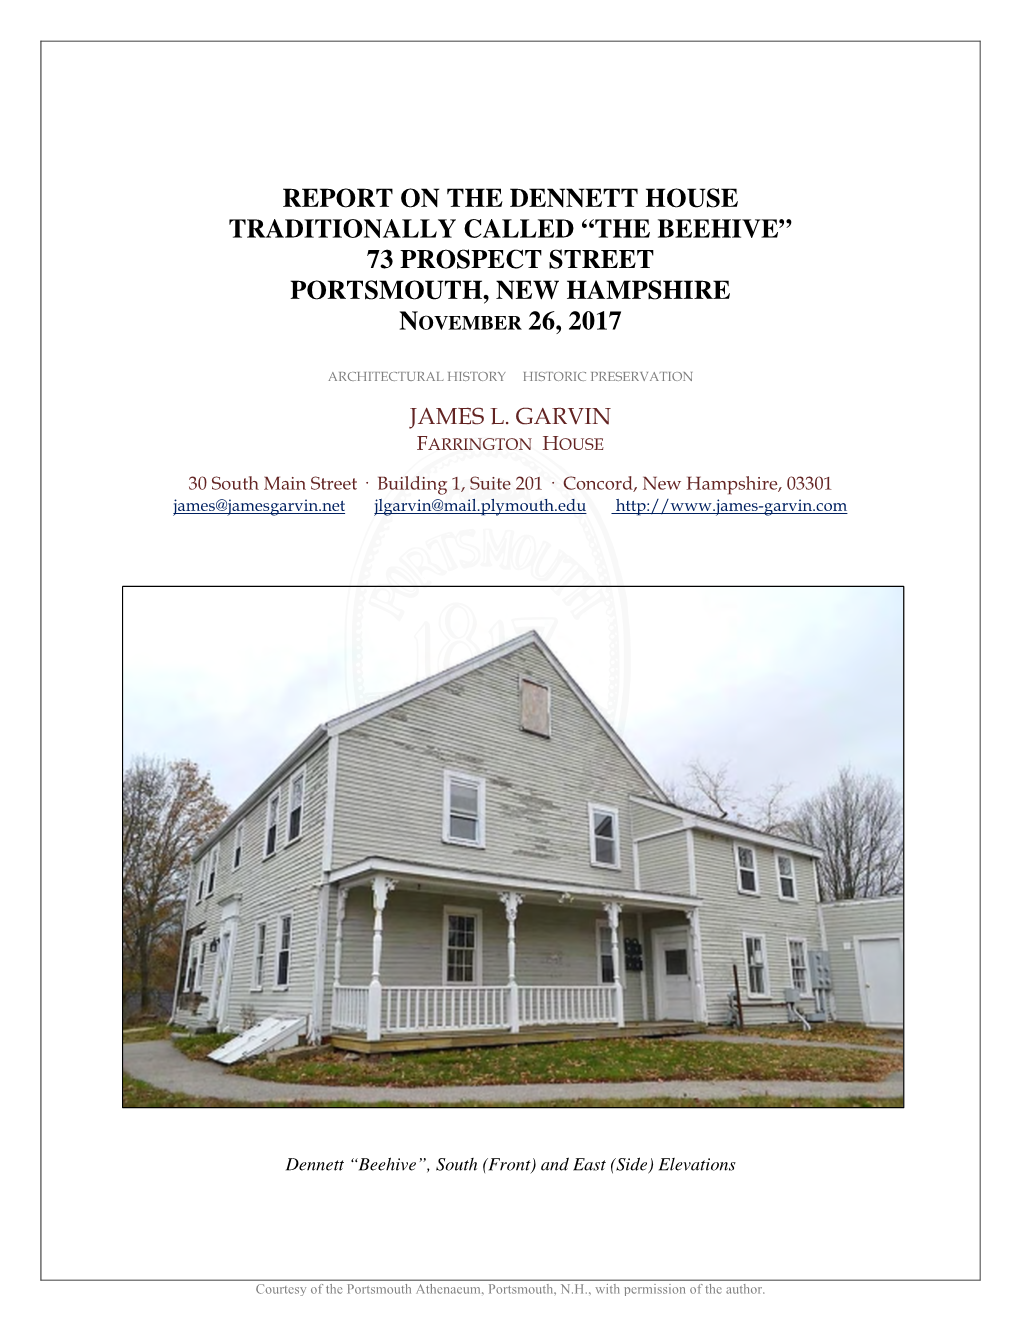 Report on the Dennett House Traditionally Called “The Beehive” 73 Prospect Street Portsmouth, New Hampshire November 26, 2017